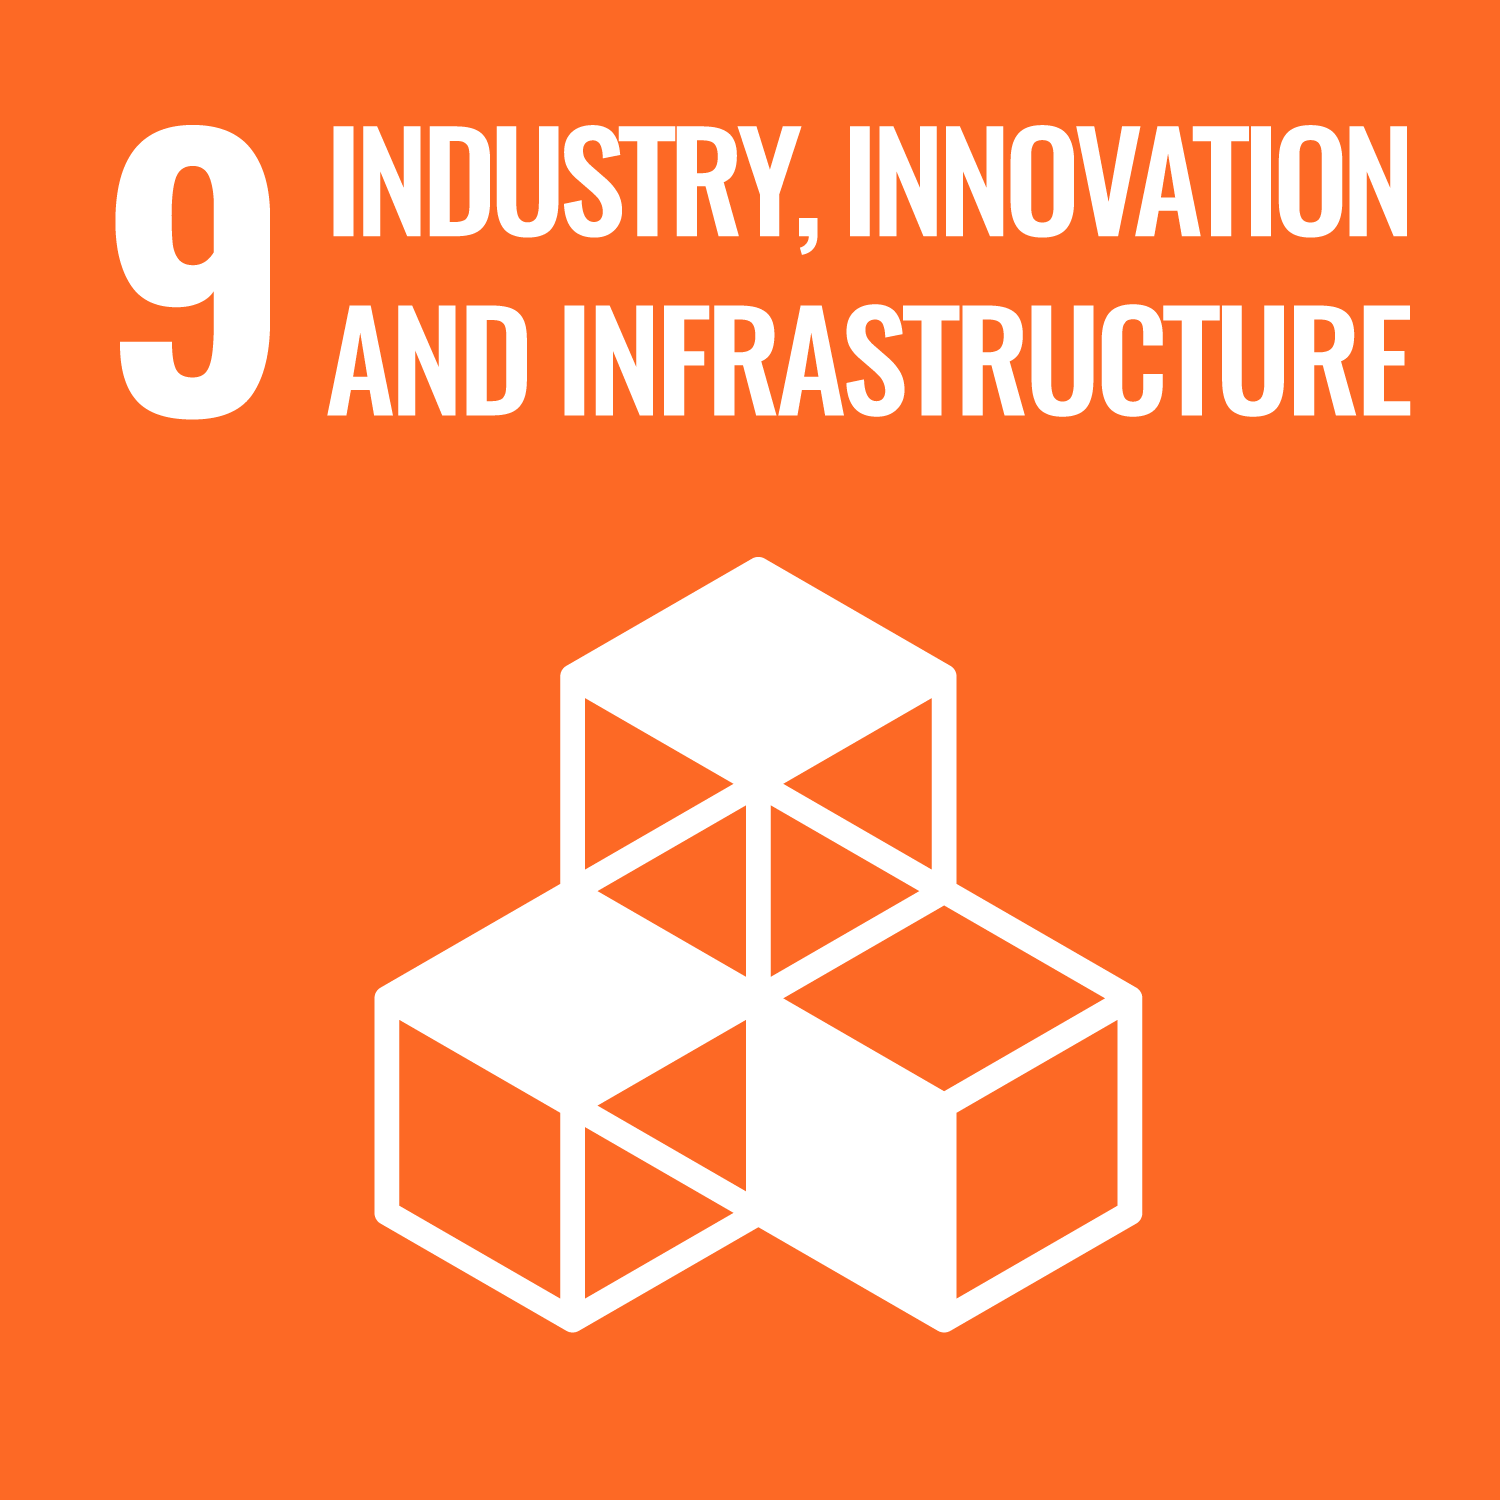 UN SDG 9 Industry, Innovation and Infrastructure